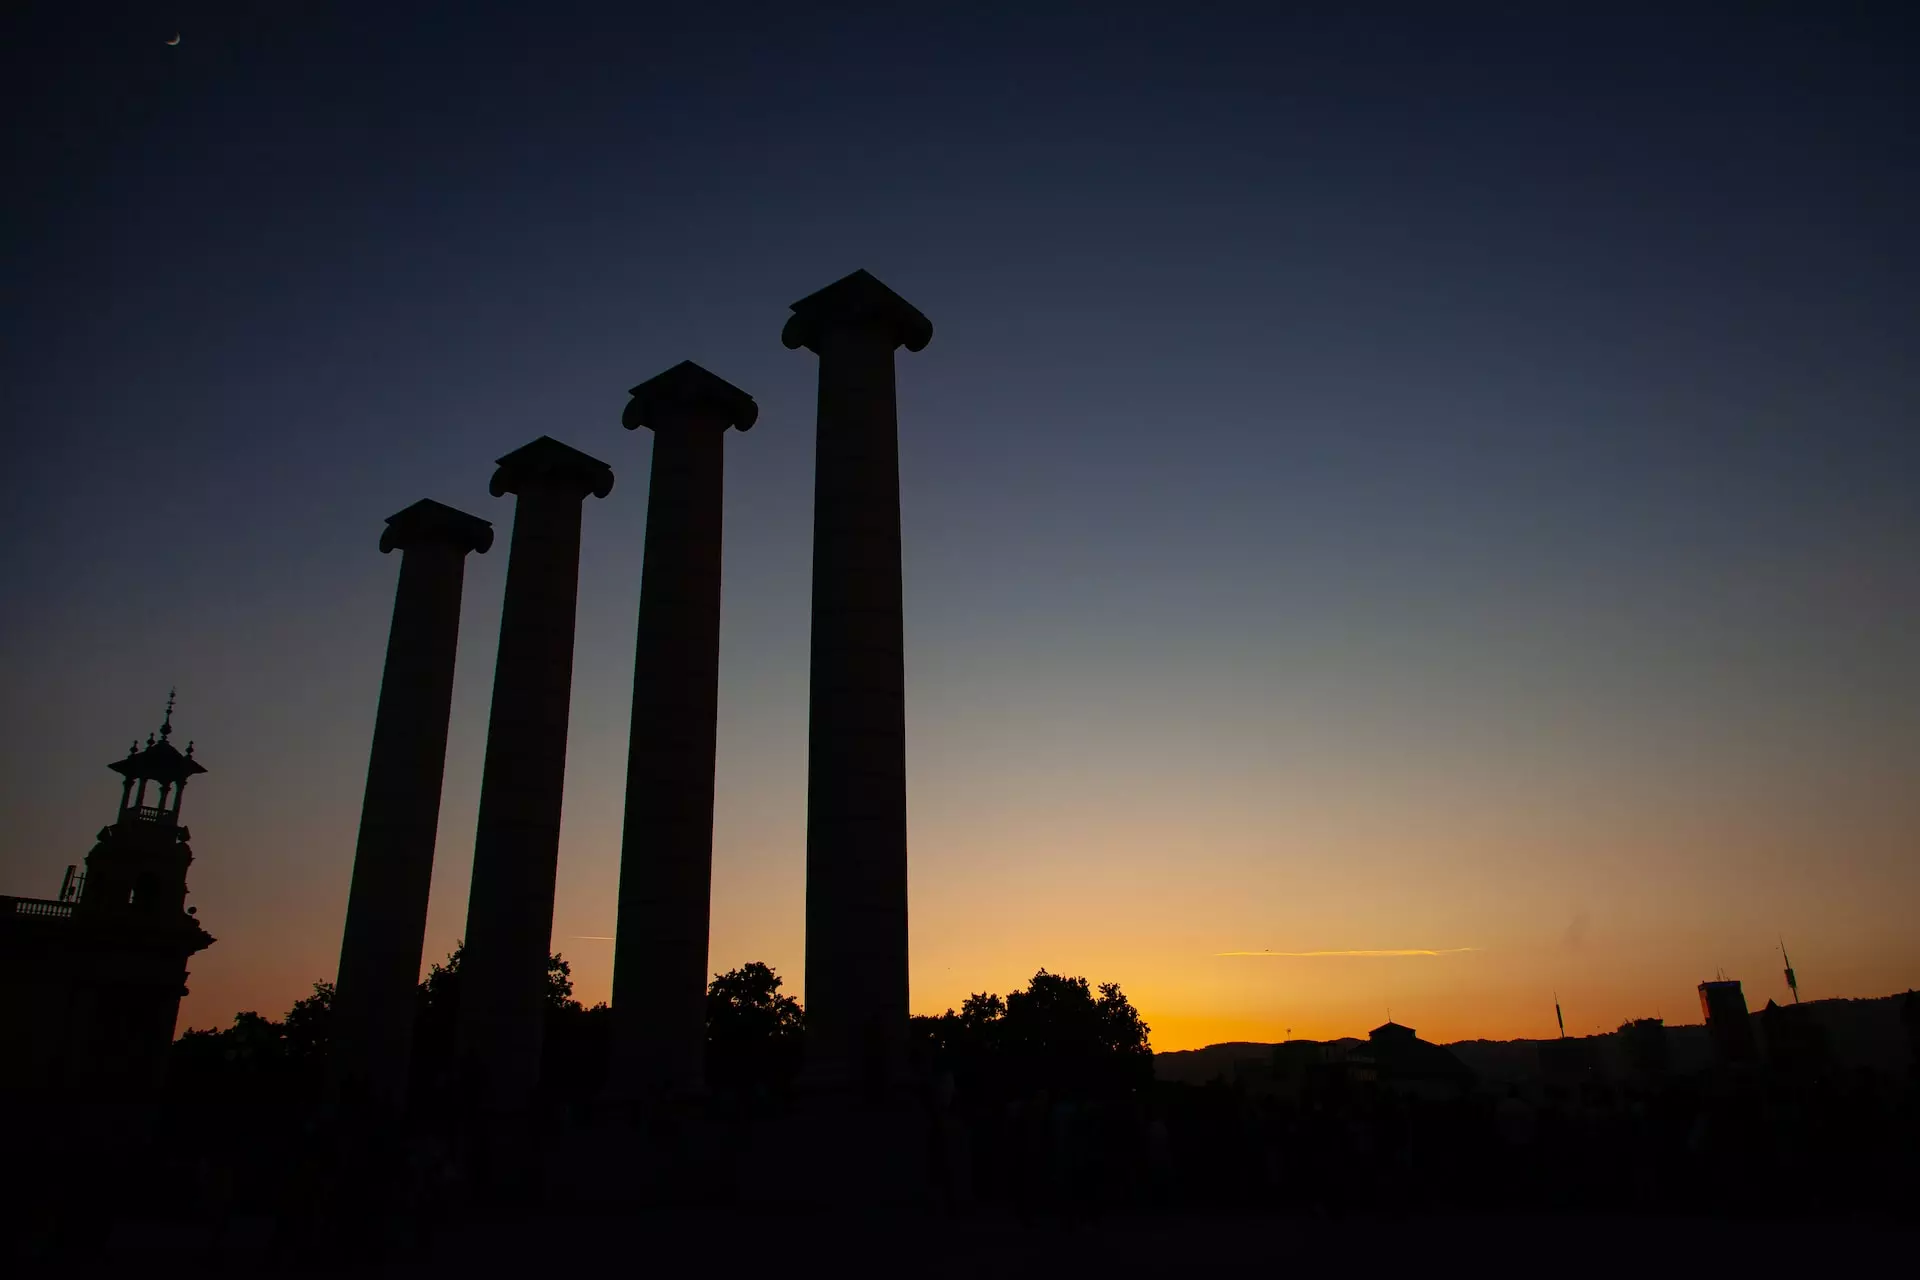 Ancient columns silhouetted against a sunset